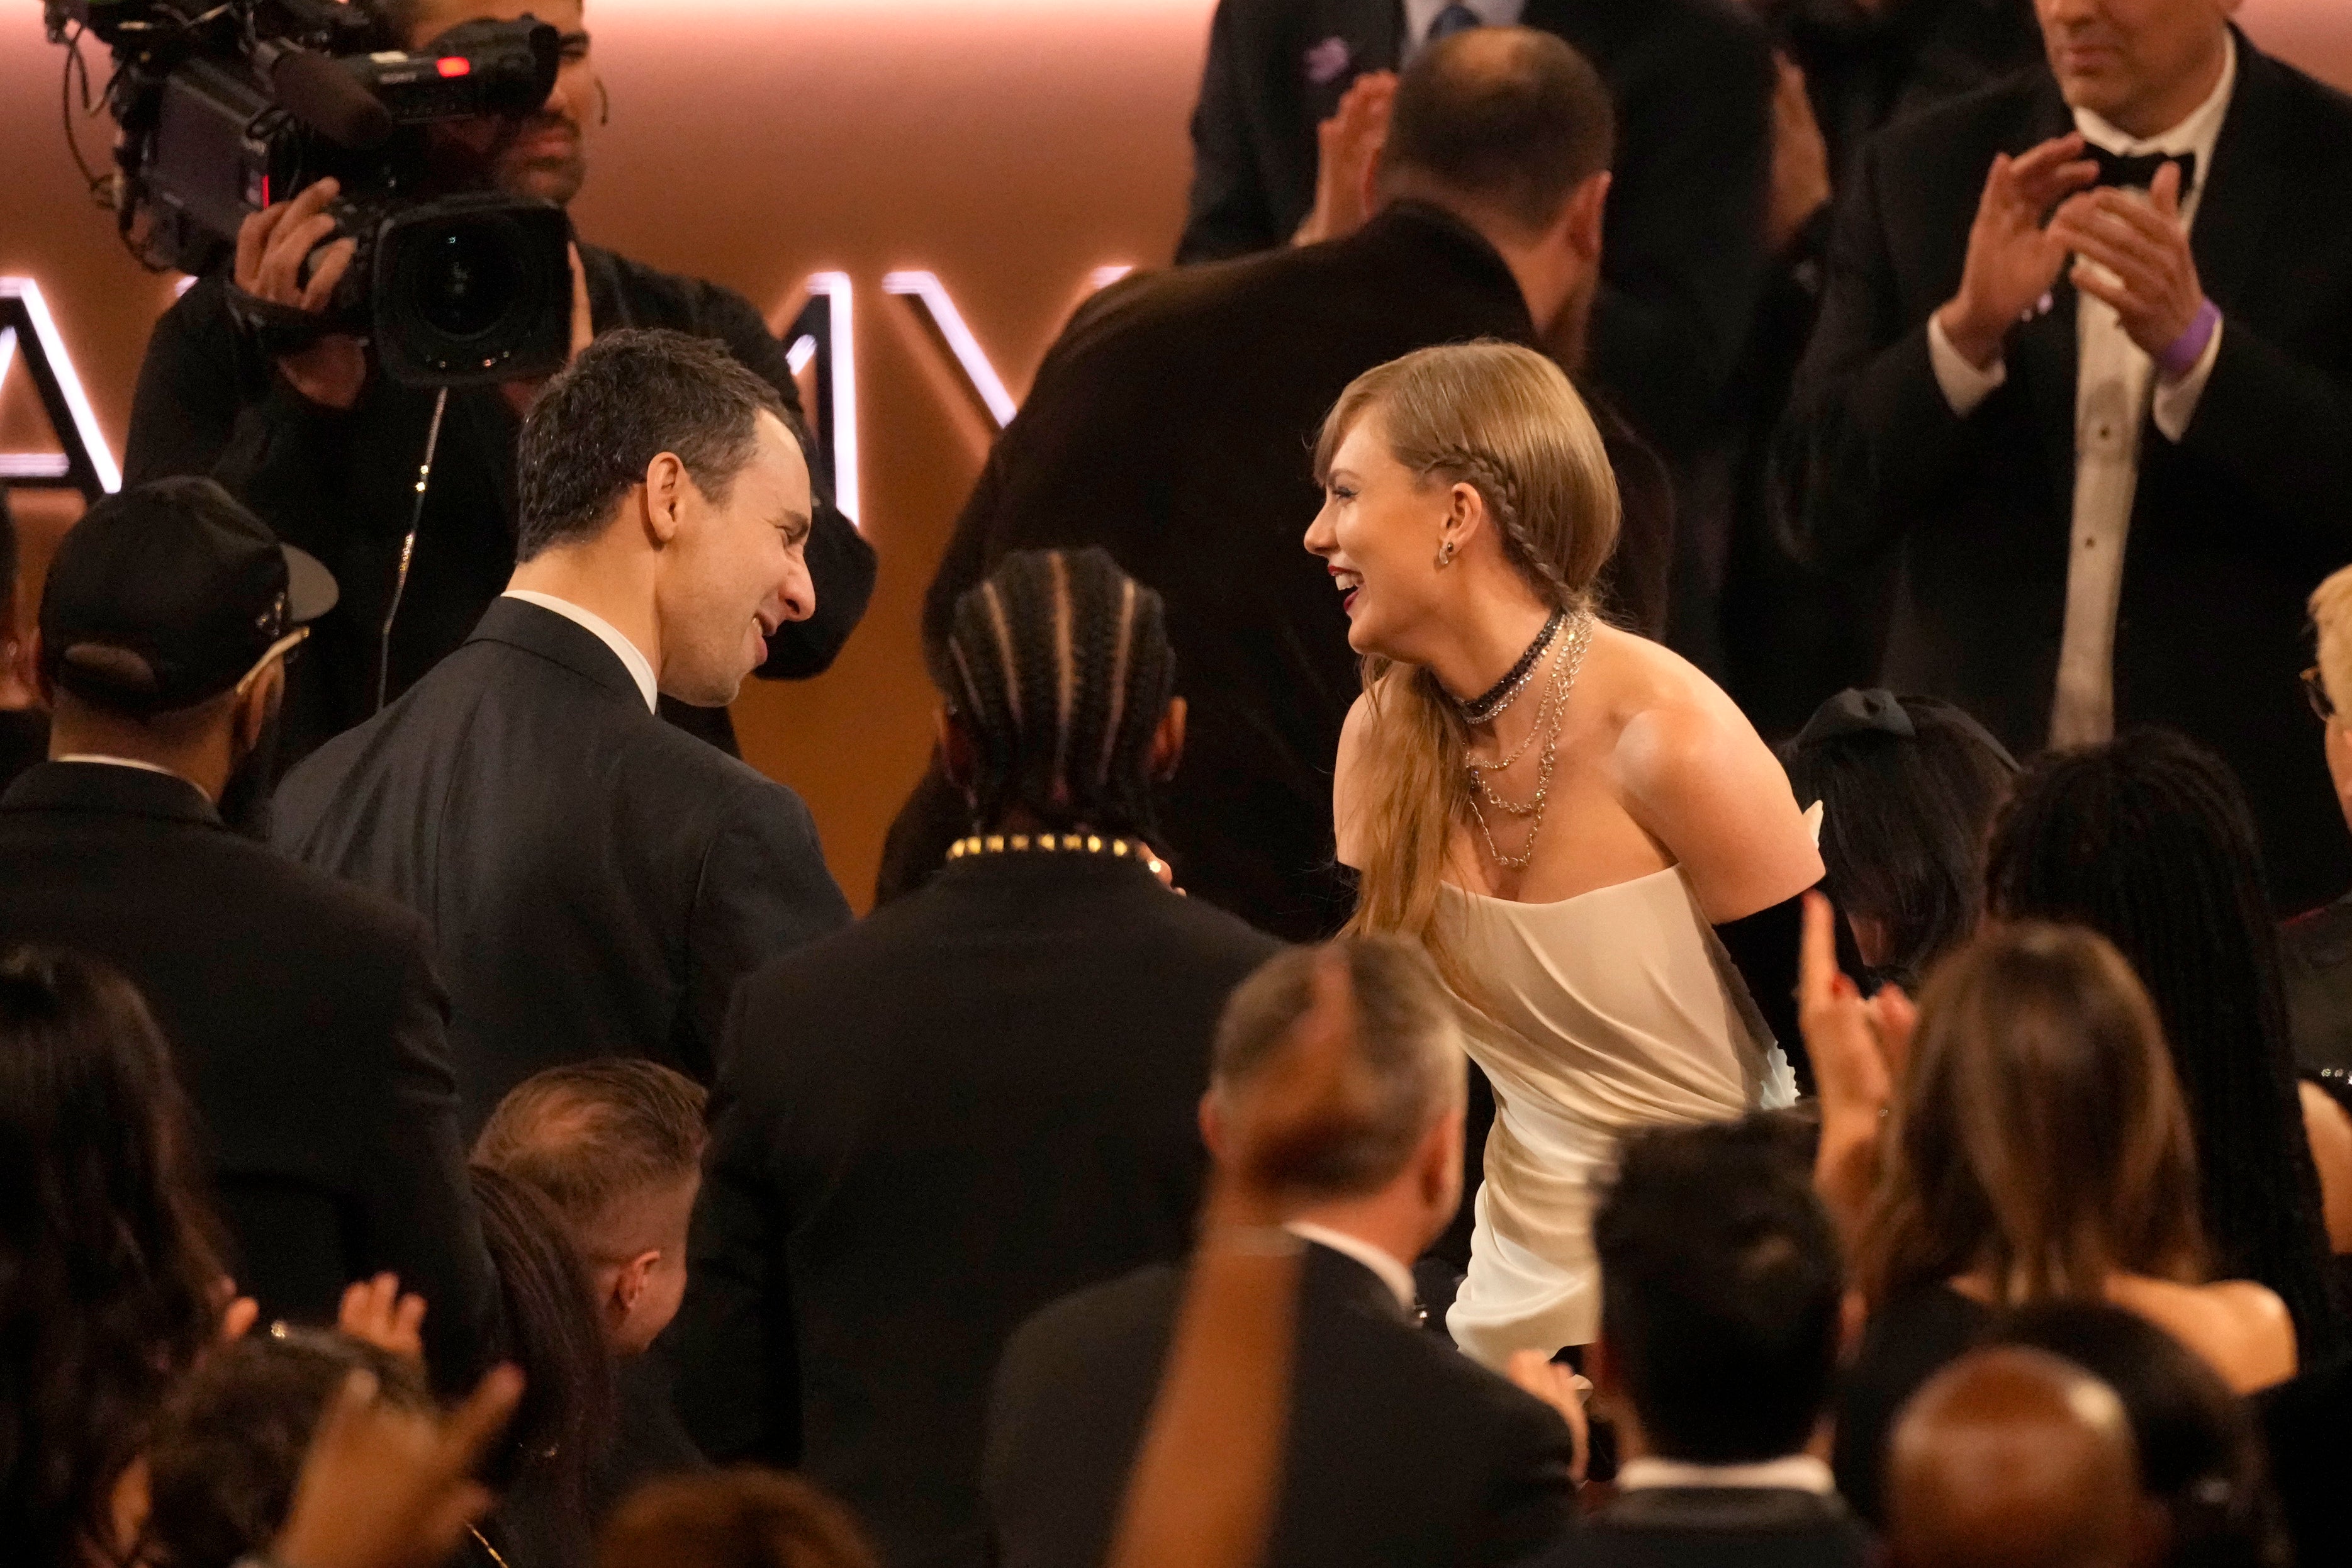 Jack Antonoff and Taylor Swift at the Grammys